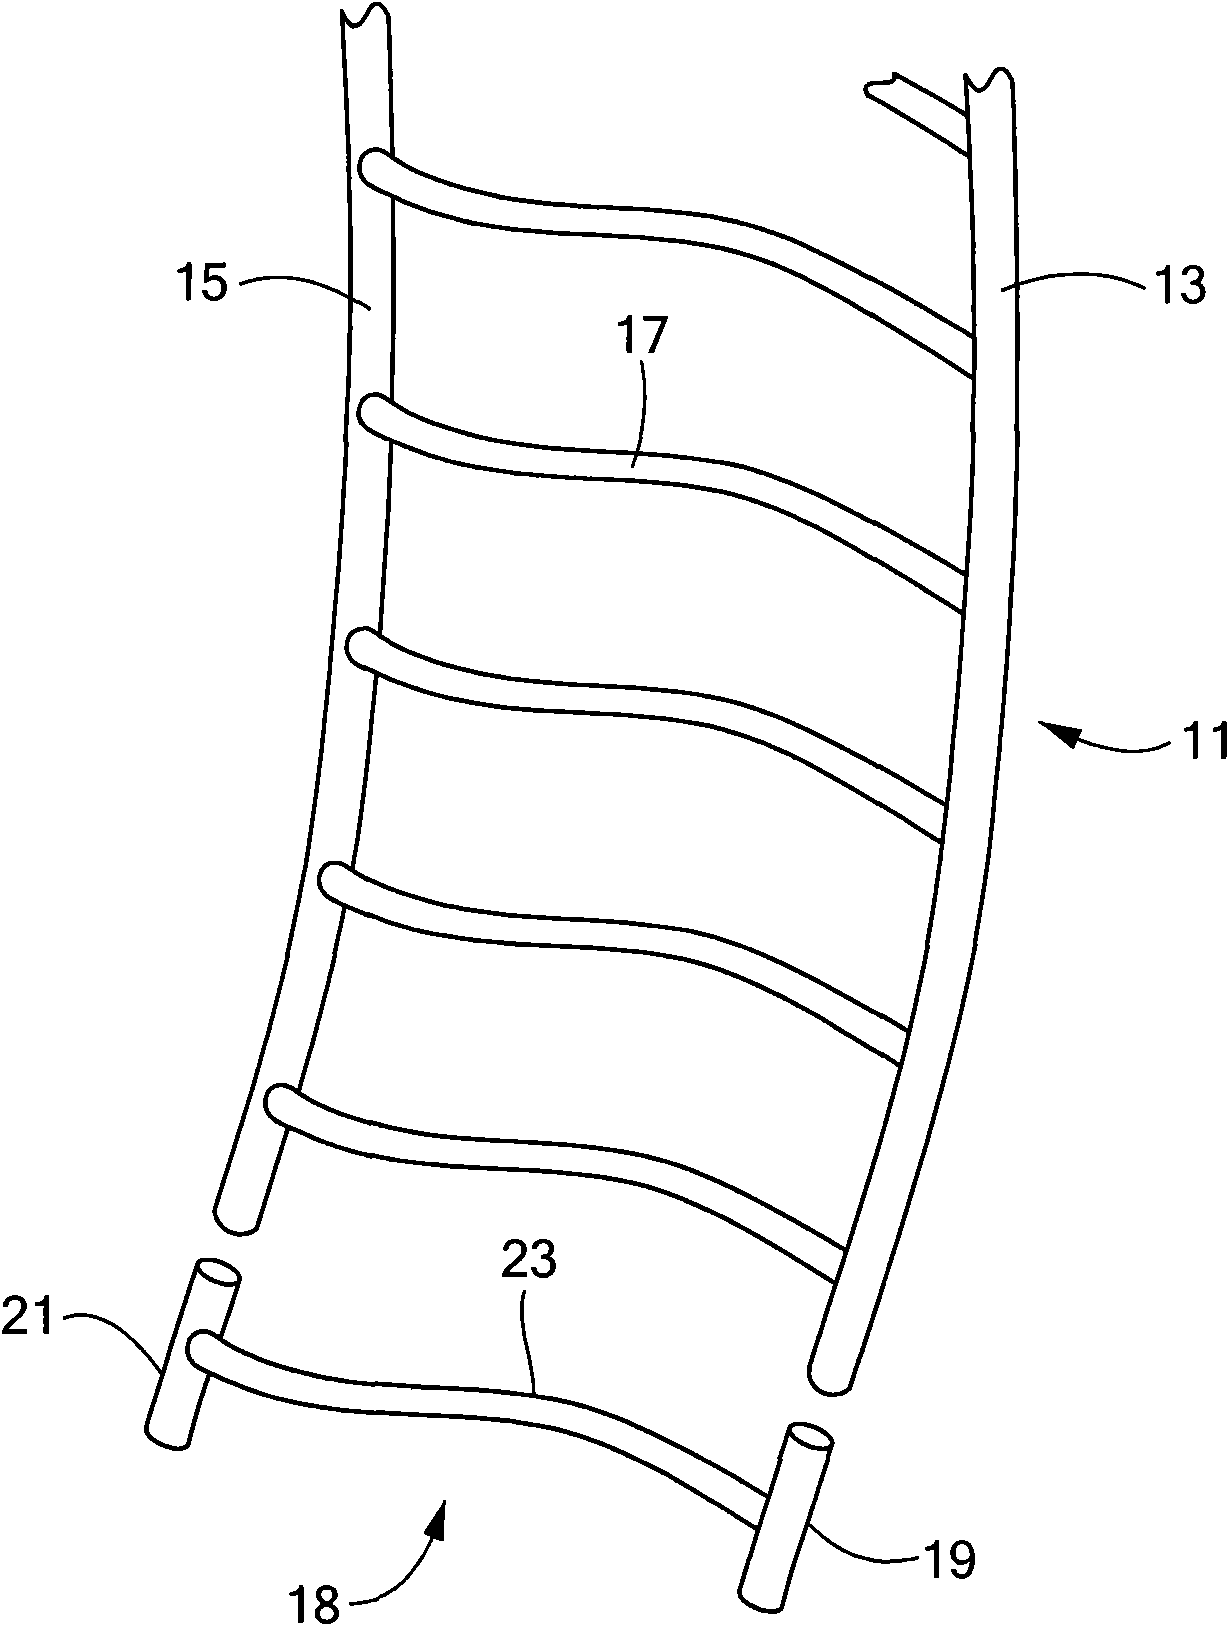 Device for dispensing plastic fasteners